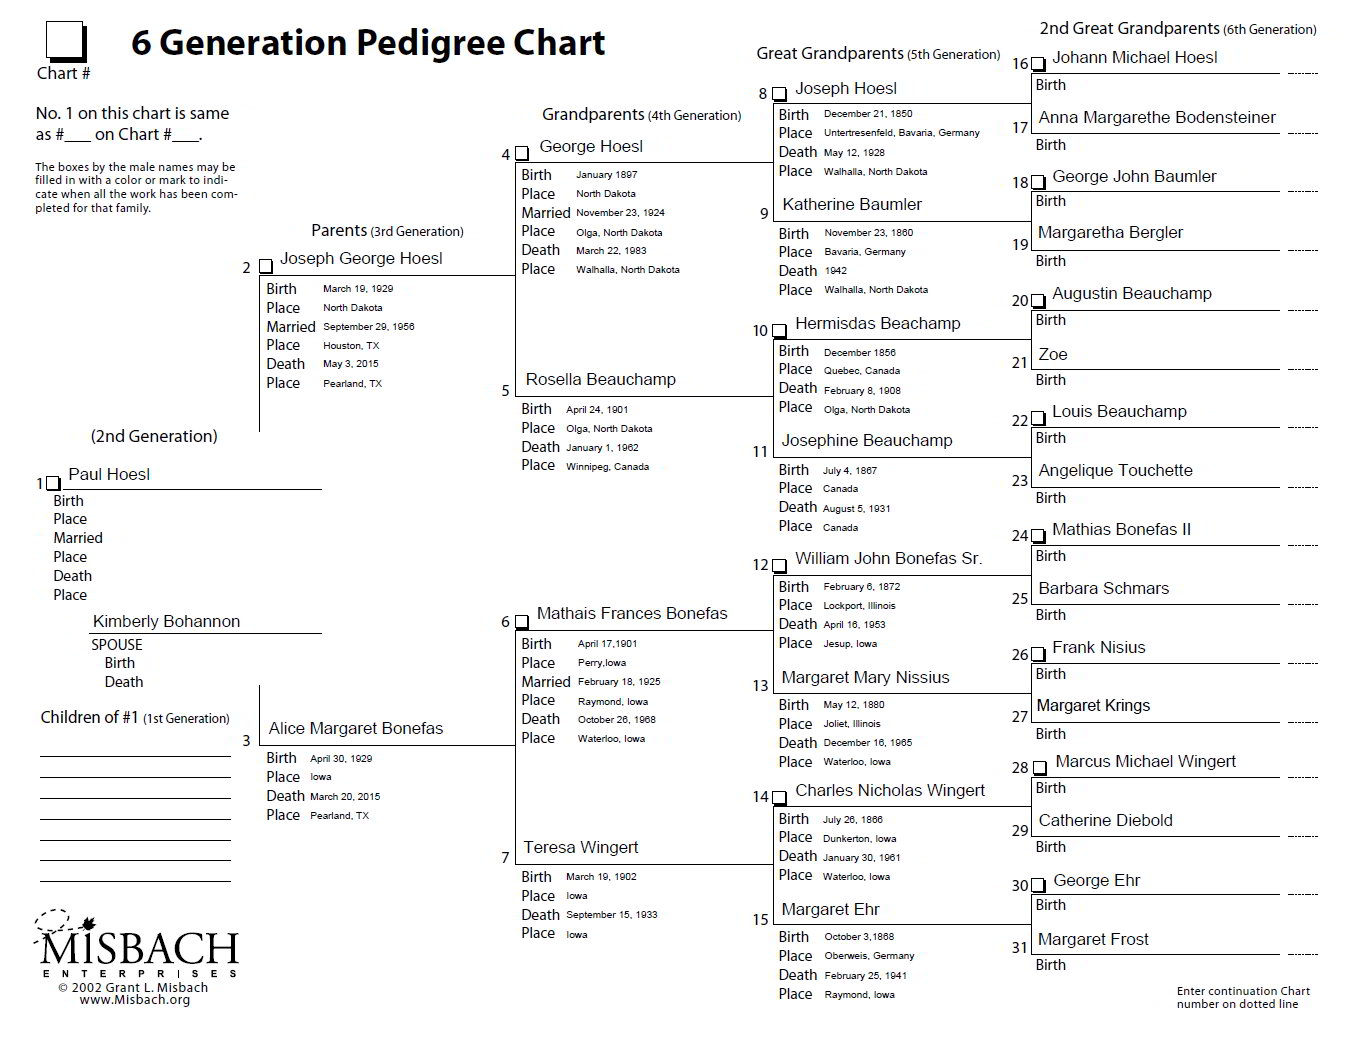 Get access to a free family genealogy chart called the Pedigree Chart from one of the nation's top family research sites.